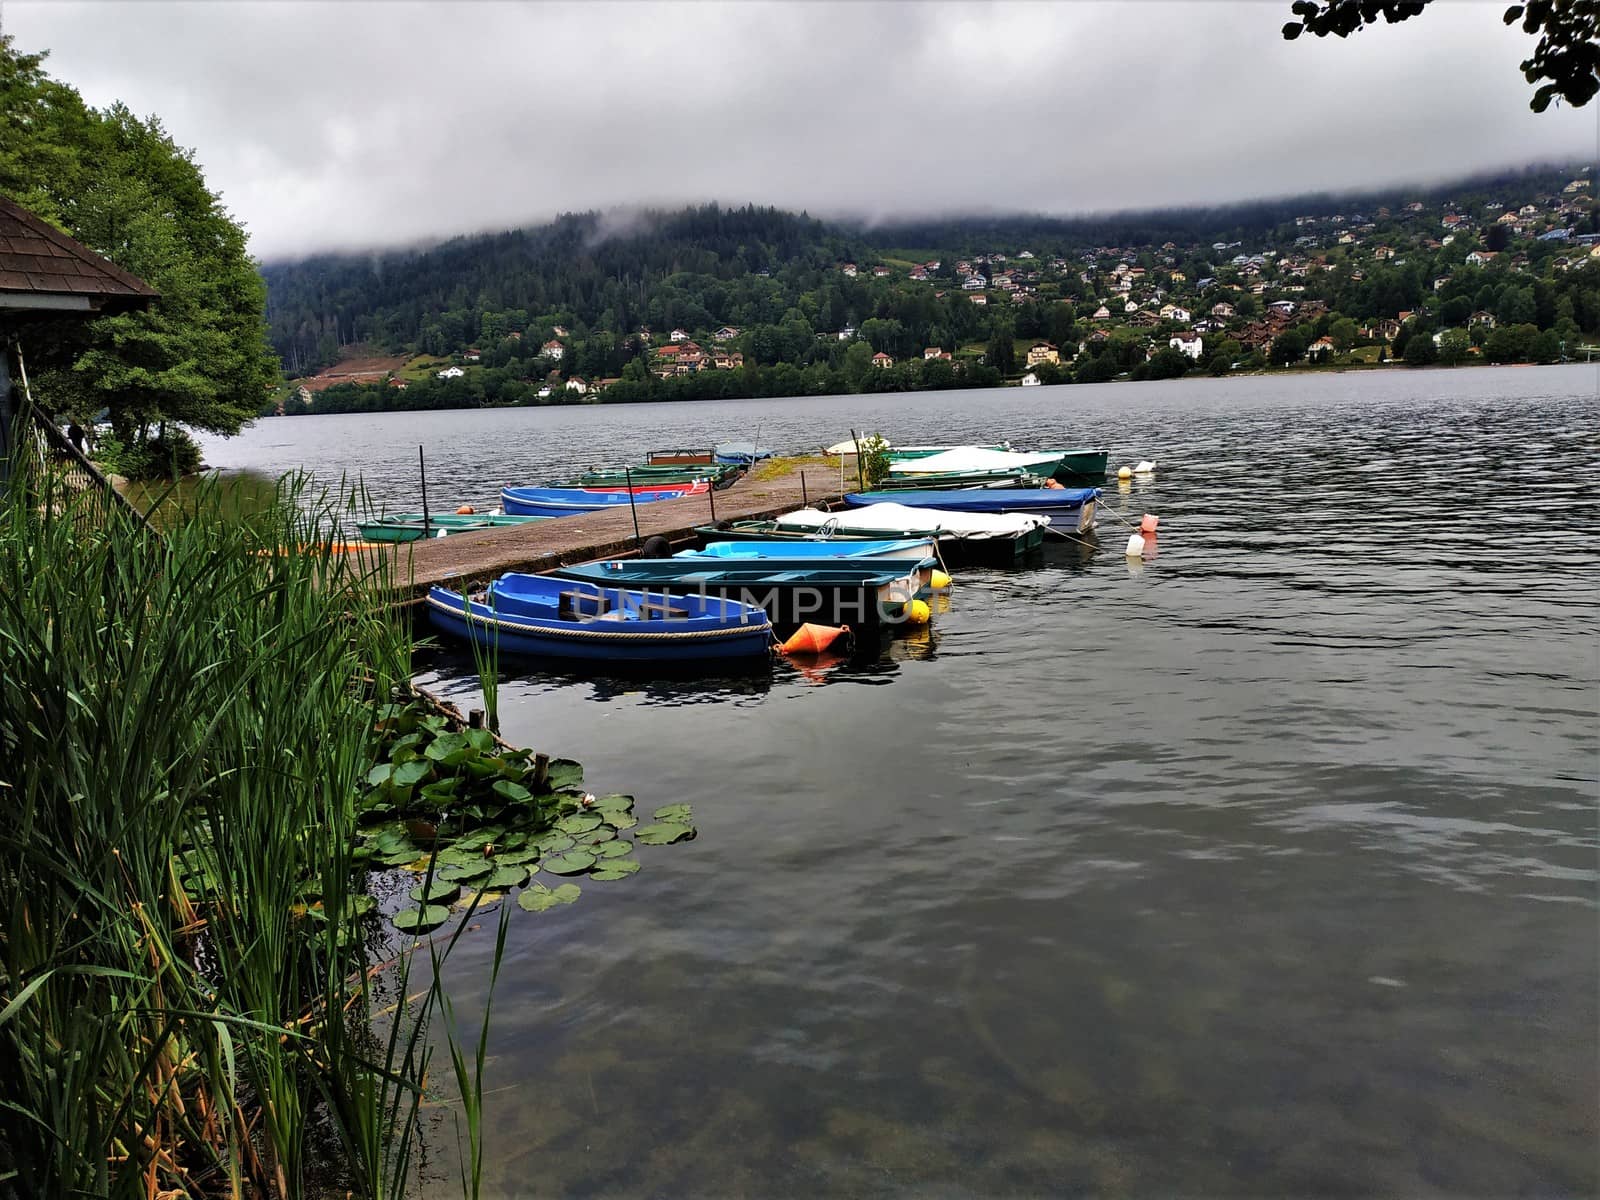 Small boats on a landing stage on the Lac de Gerardmer, France